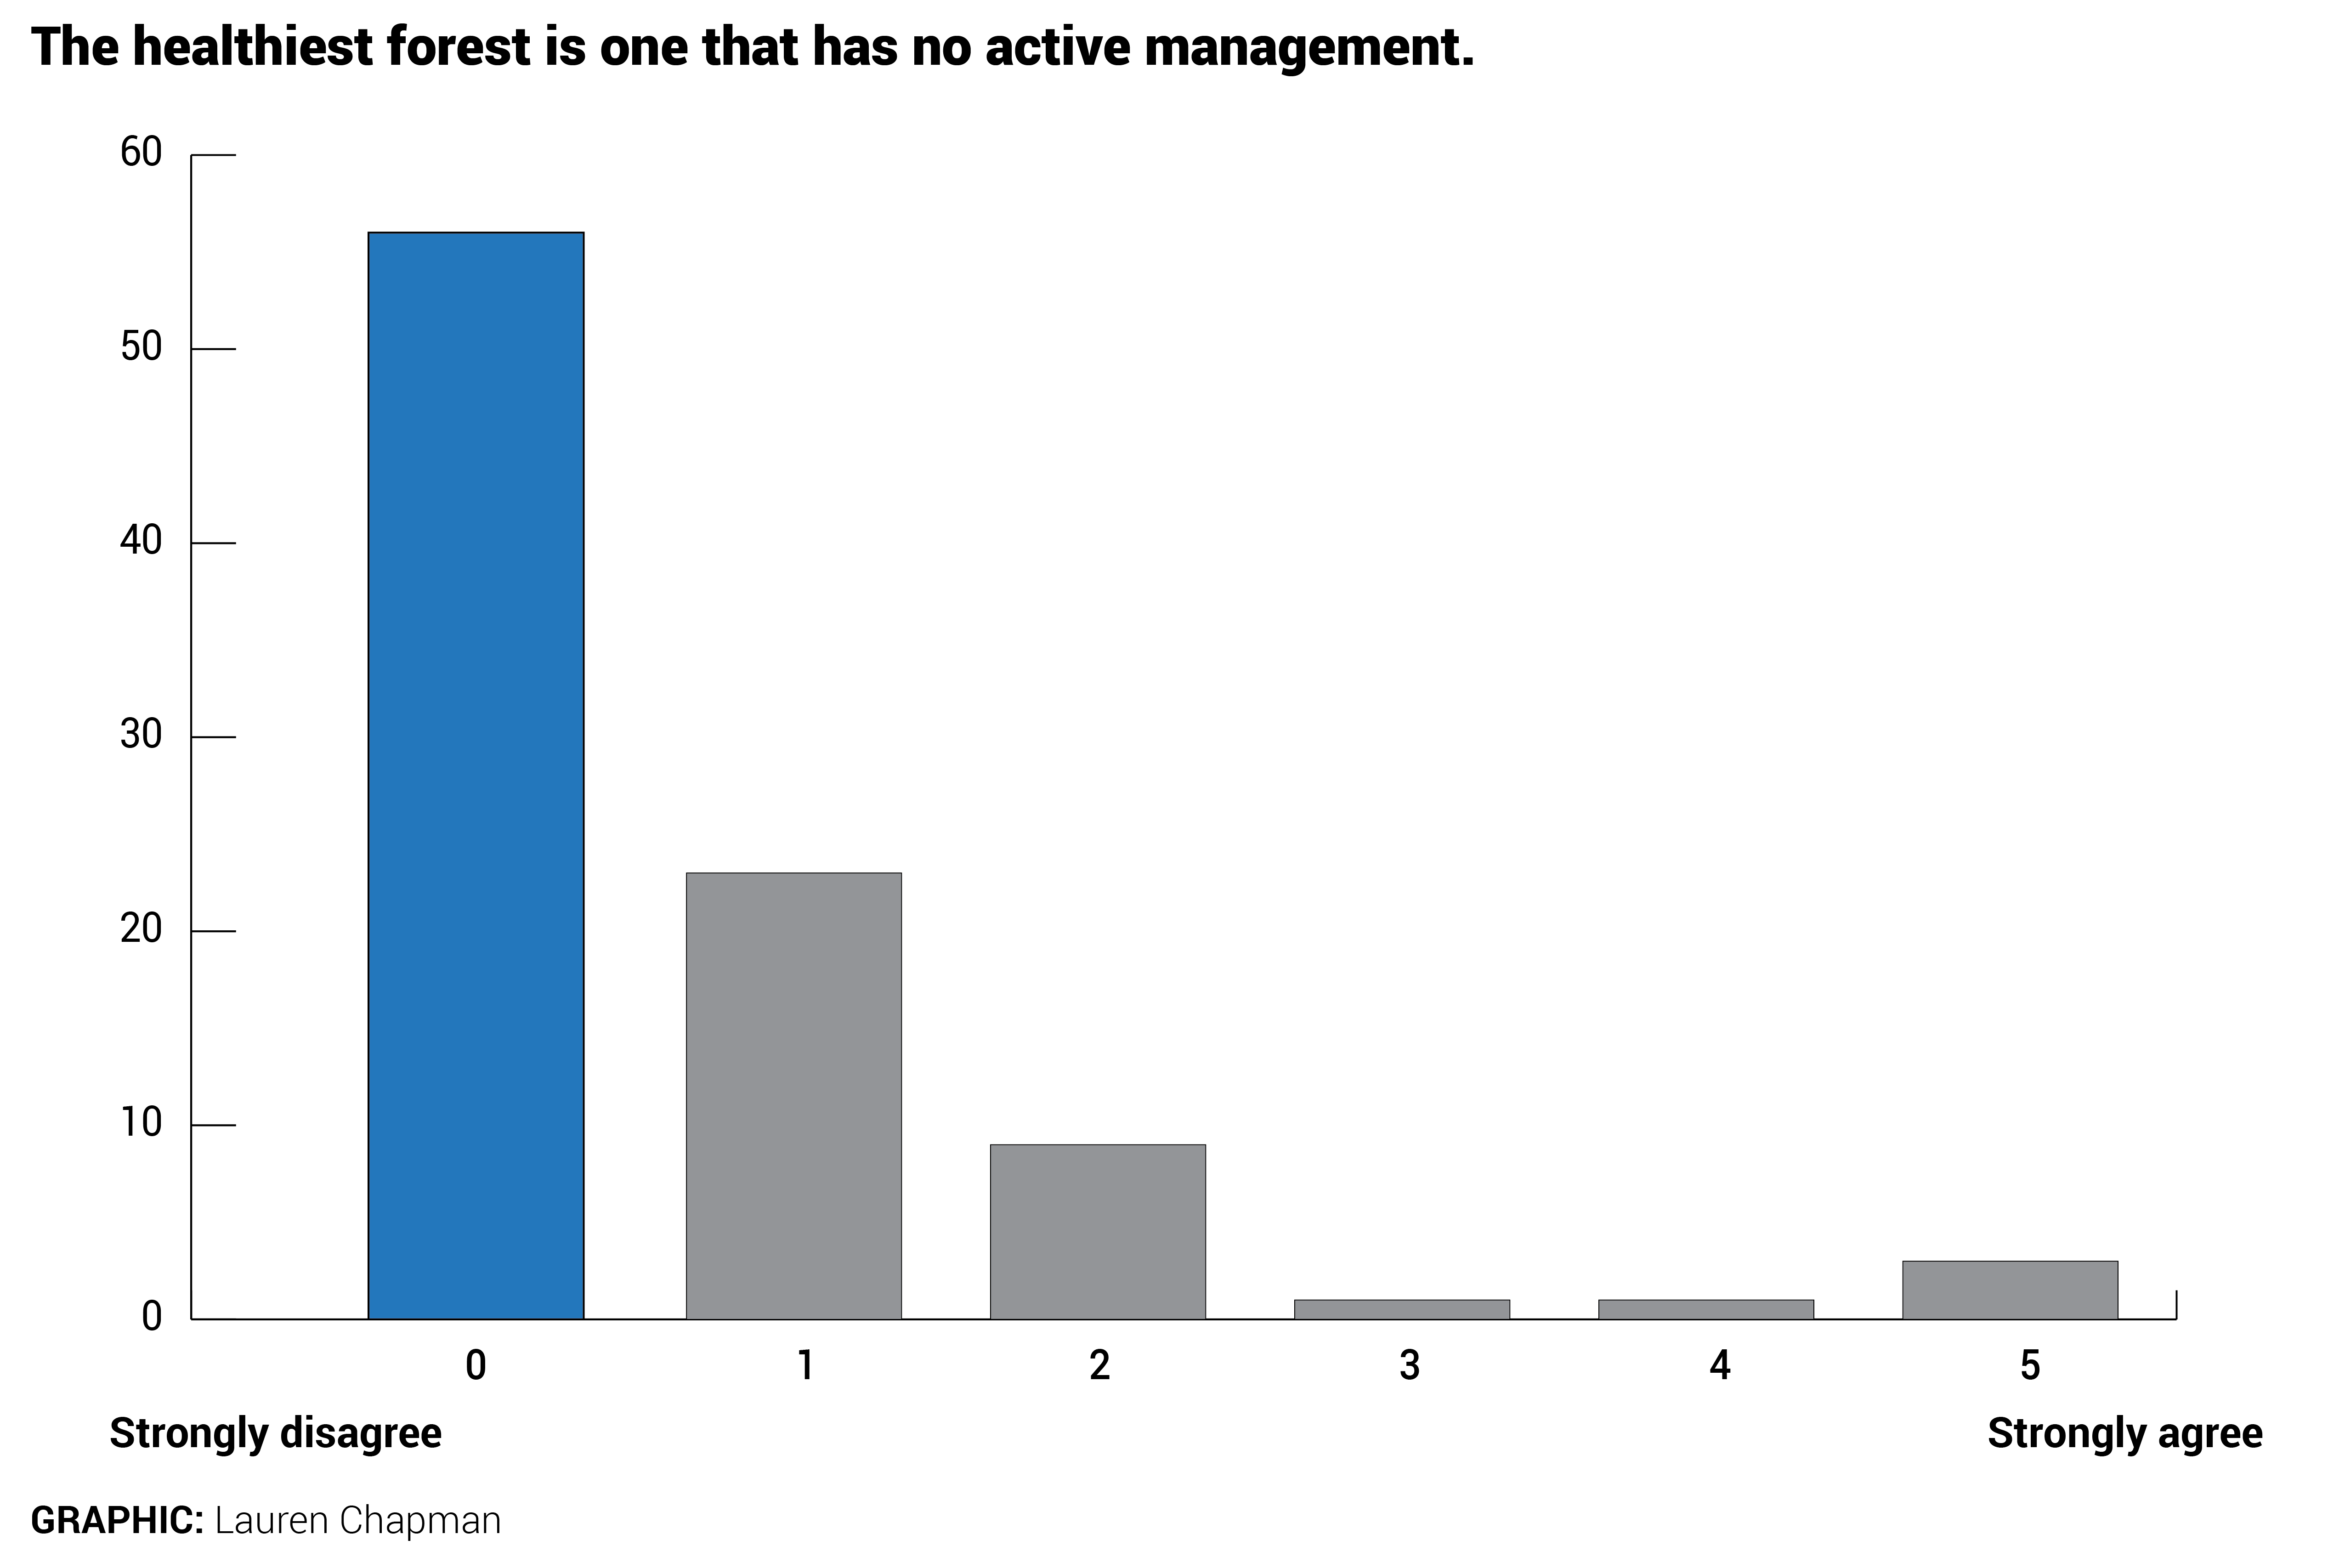 The healthiest forest is one that has little active management. On a scale of 1 to 5, where 1 is strongly disagree and 5 is strongly agree, 44 said 1. 
    28 said 2. 16 said 3. 4 said 4. 1 said 5.